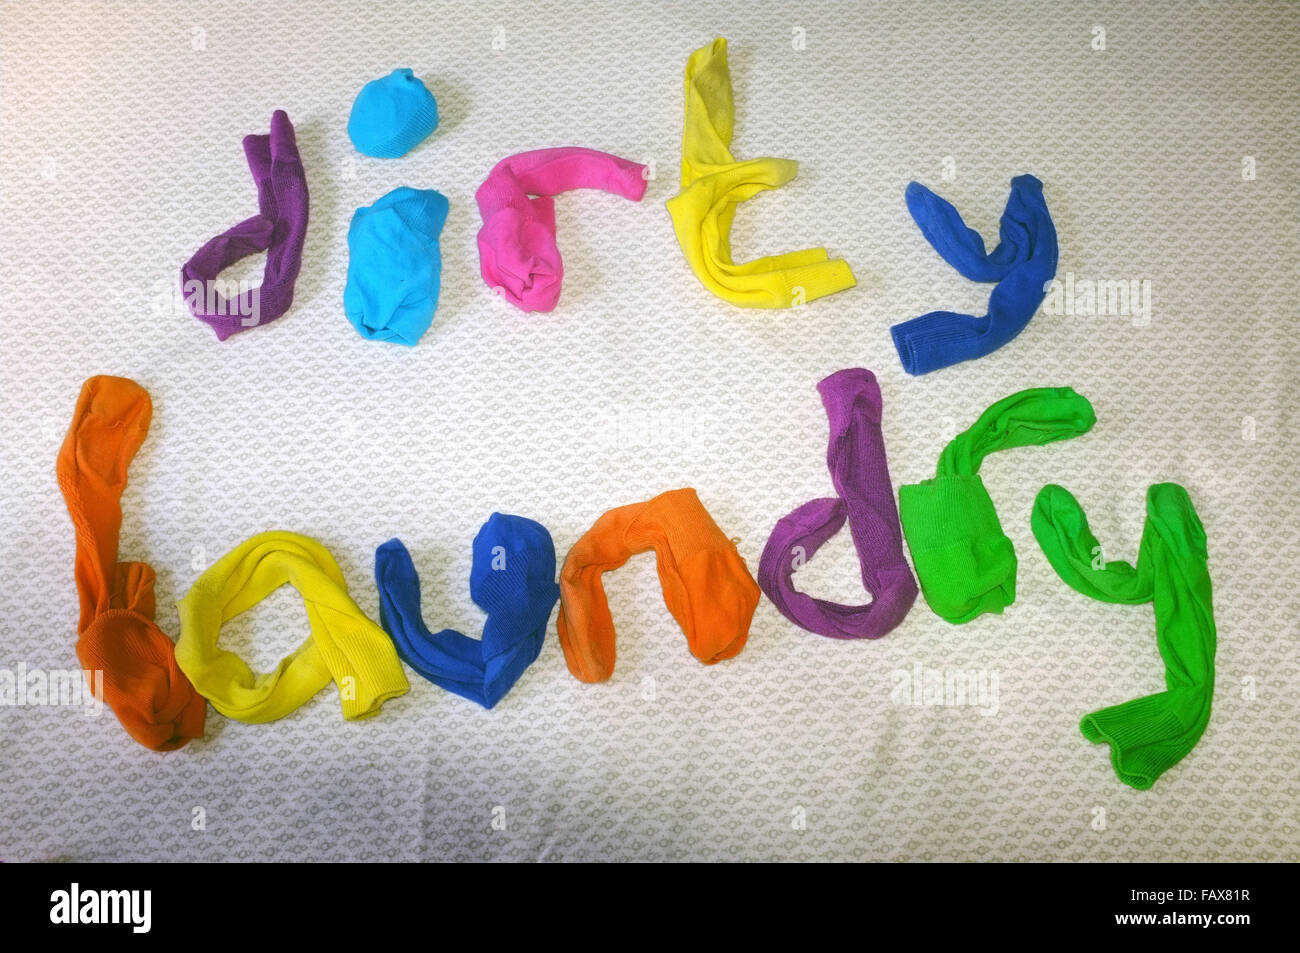 The word laundry made out of colourful socks laying on a duvet cover. Stock Photo